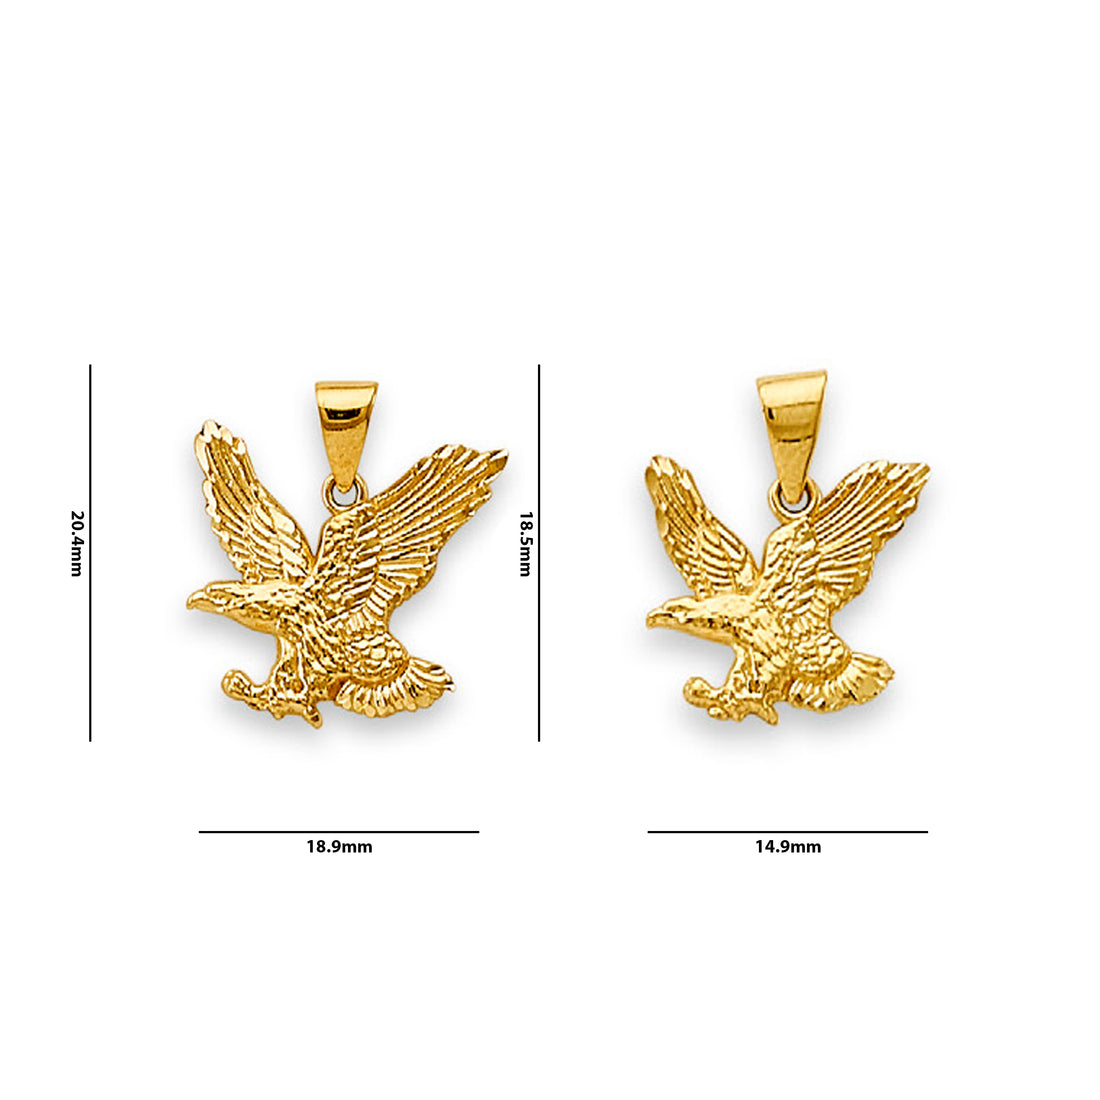 Yellow Gold Valorous American Eagle Charm Pendant  with Measurement